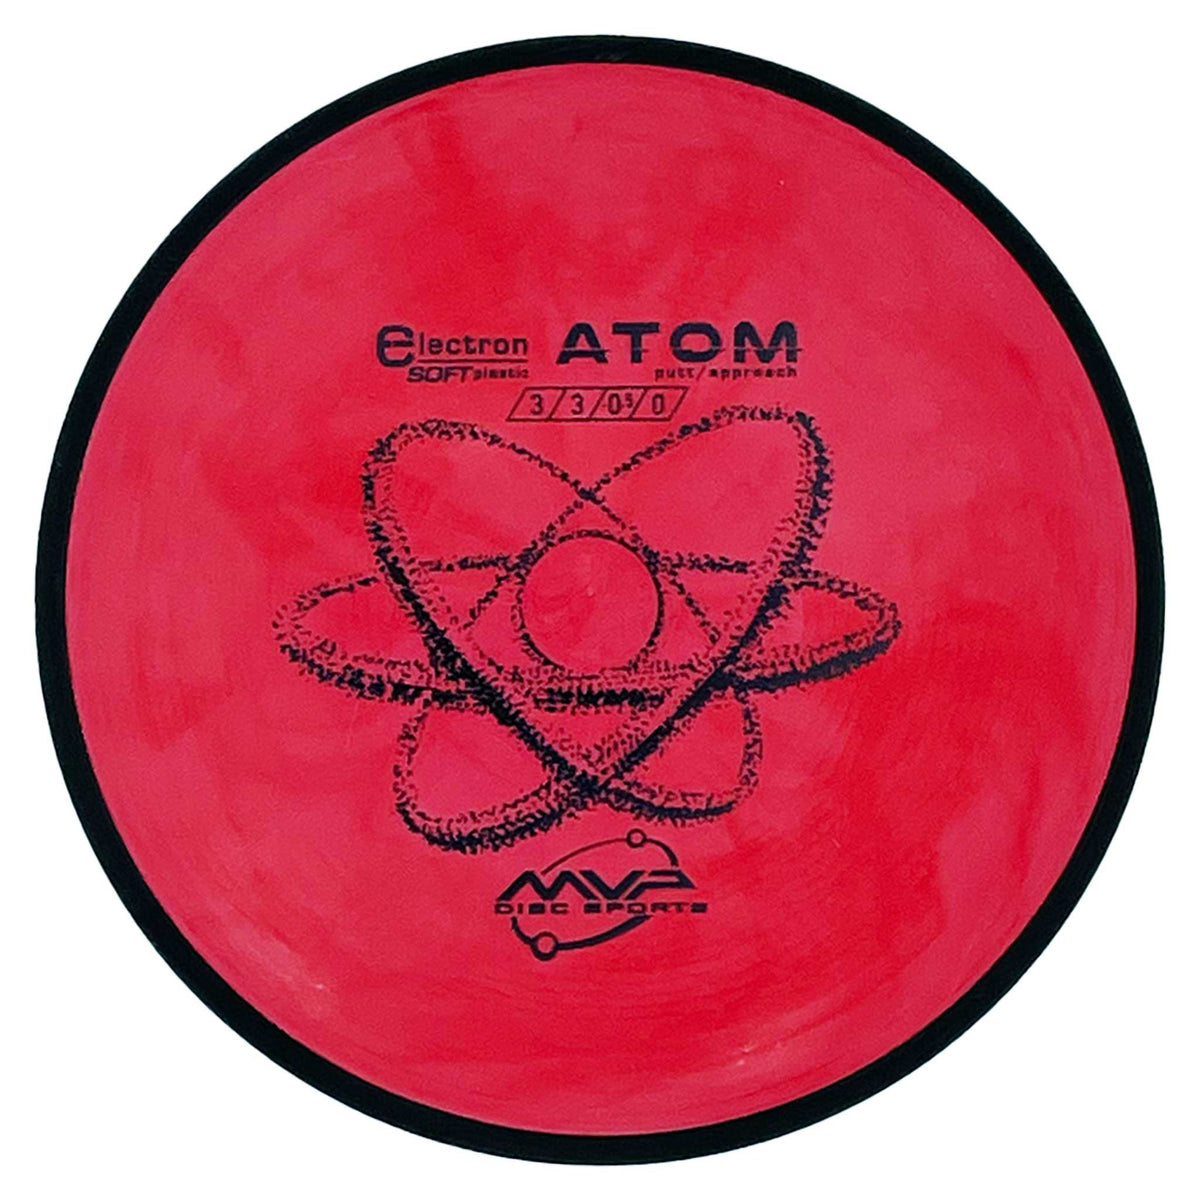 MBP Disc Sports Electron Soft Atom putter and approach Red